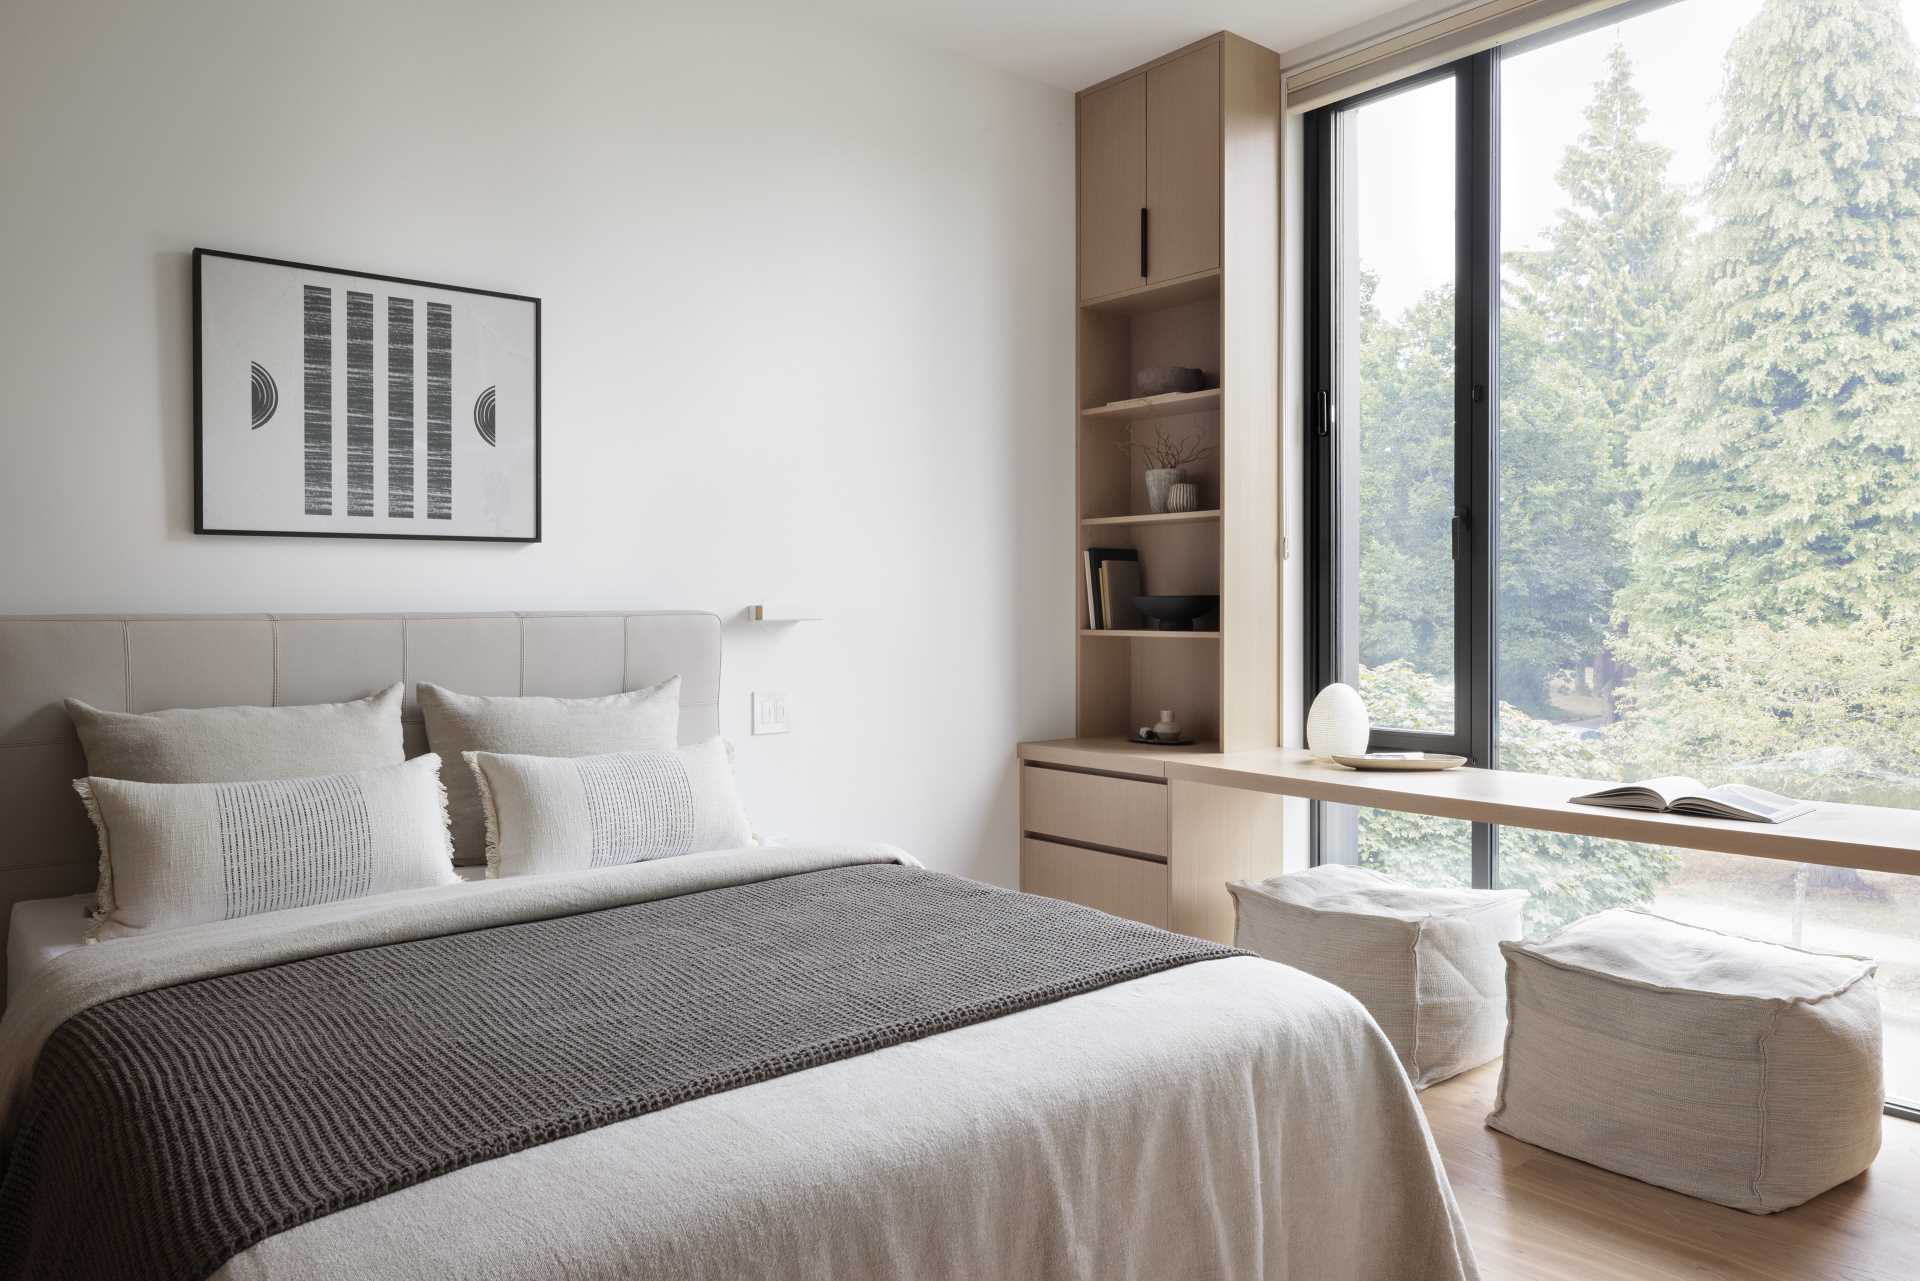 A modern bedroom with custom joinery and a desk in front of the window.